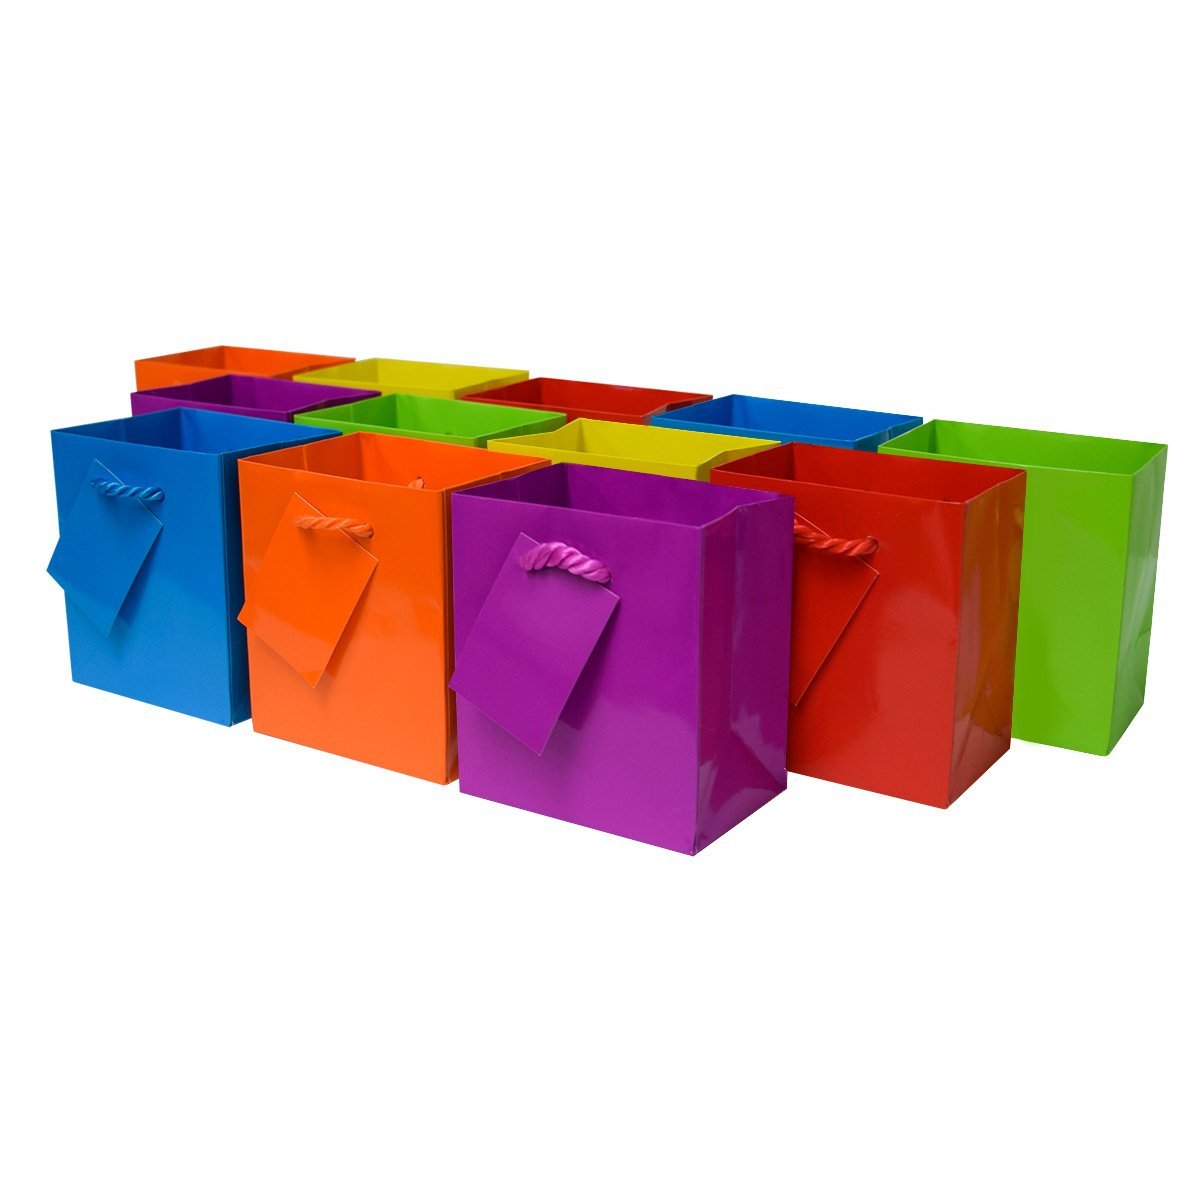 Mini Gift Bags - 12 Pack Rainbow Assorted Color Tiny Gift Bags with Handles, Reusable Plain Paper Gift Wrap Totes for Baby Shower & Birthday Party, Kids Favors, Goodie Bags, in Bulk - 4x2.75x4.5